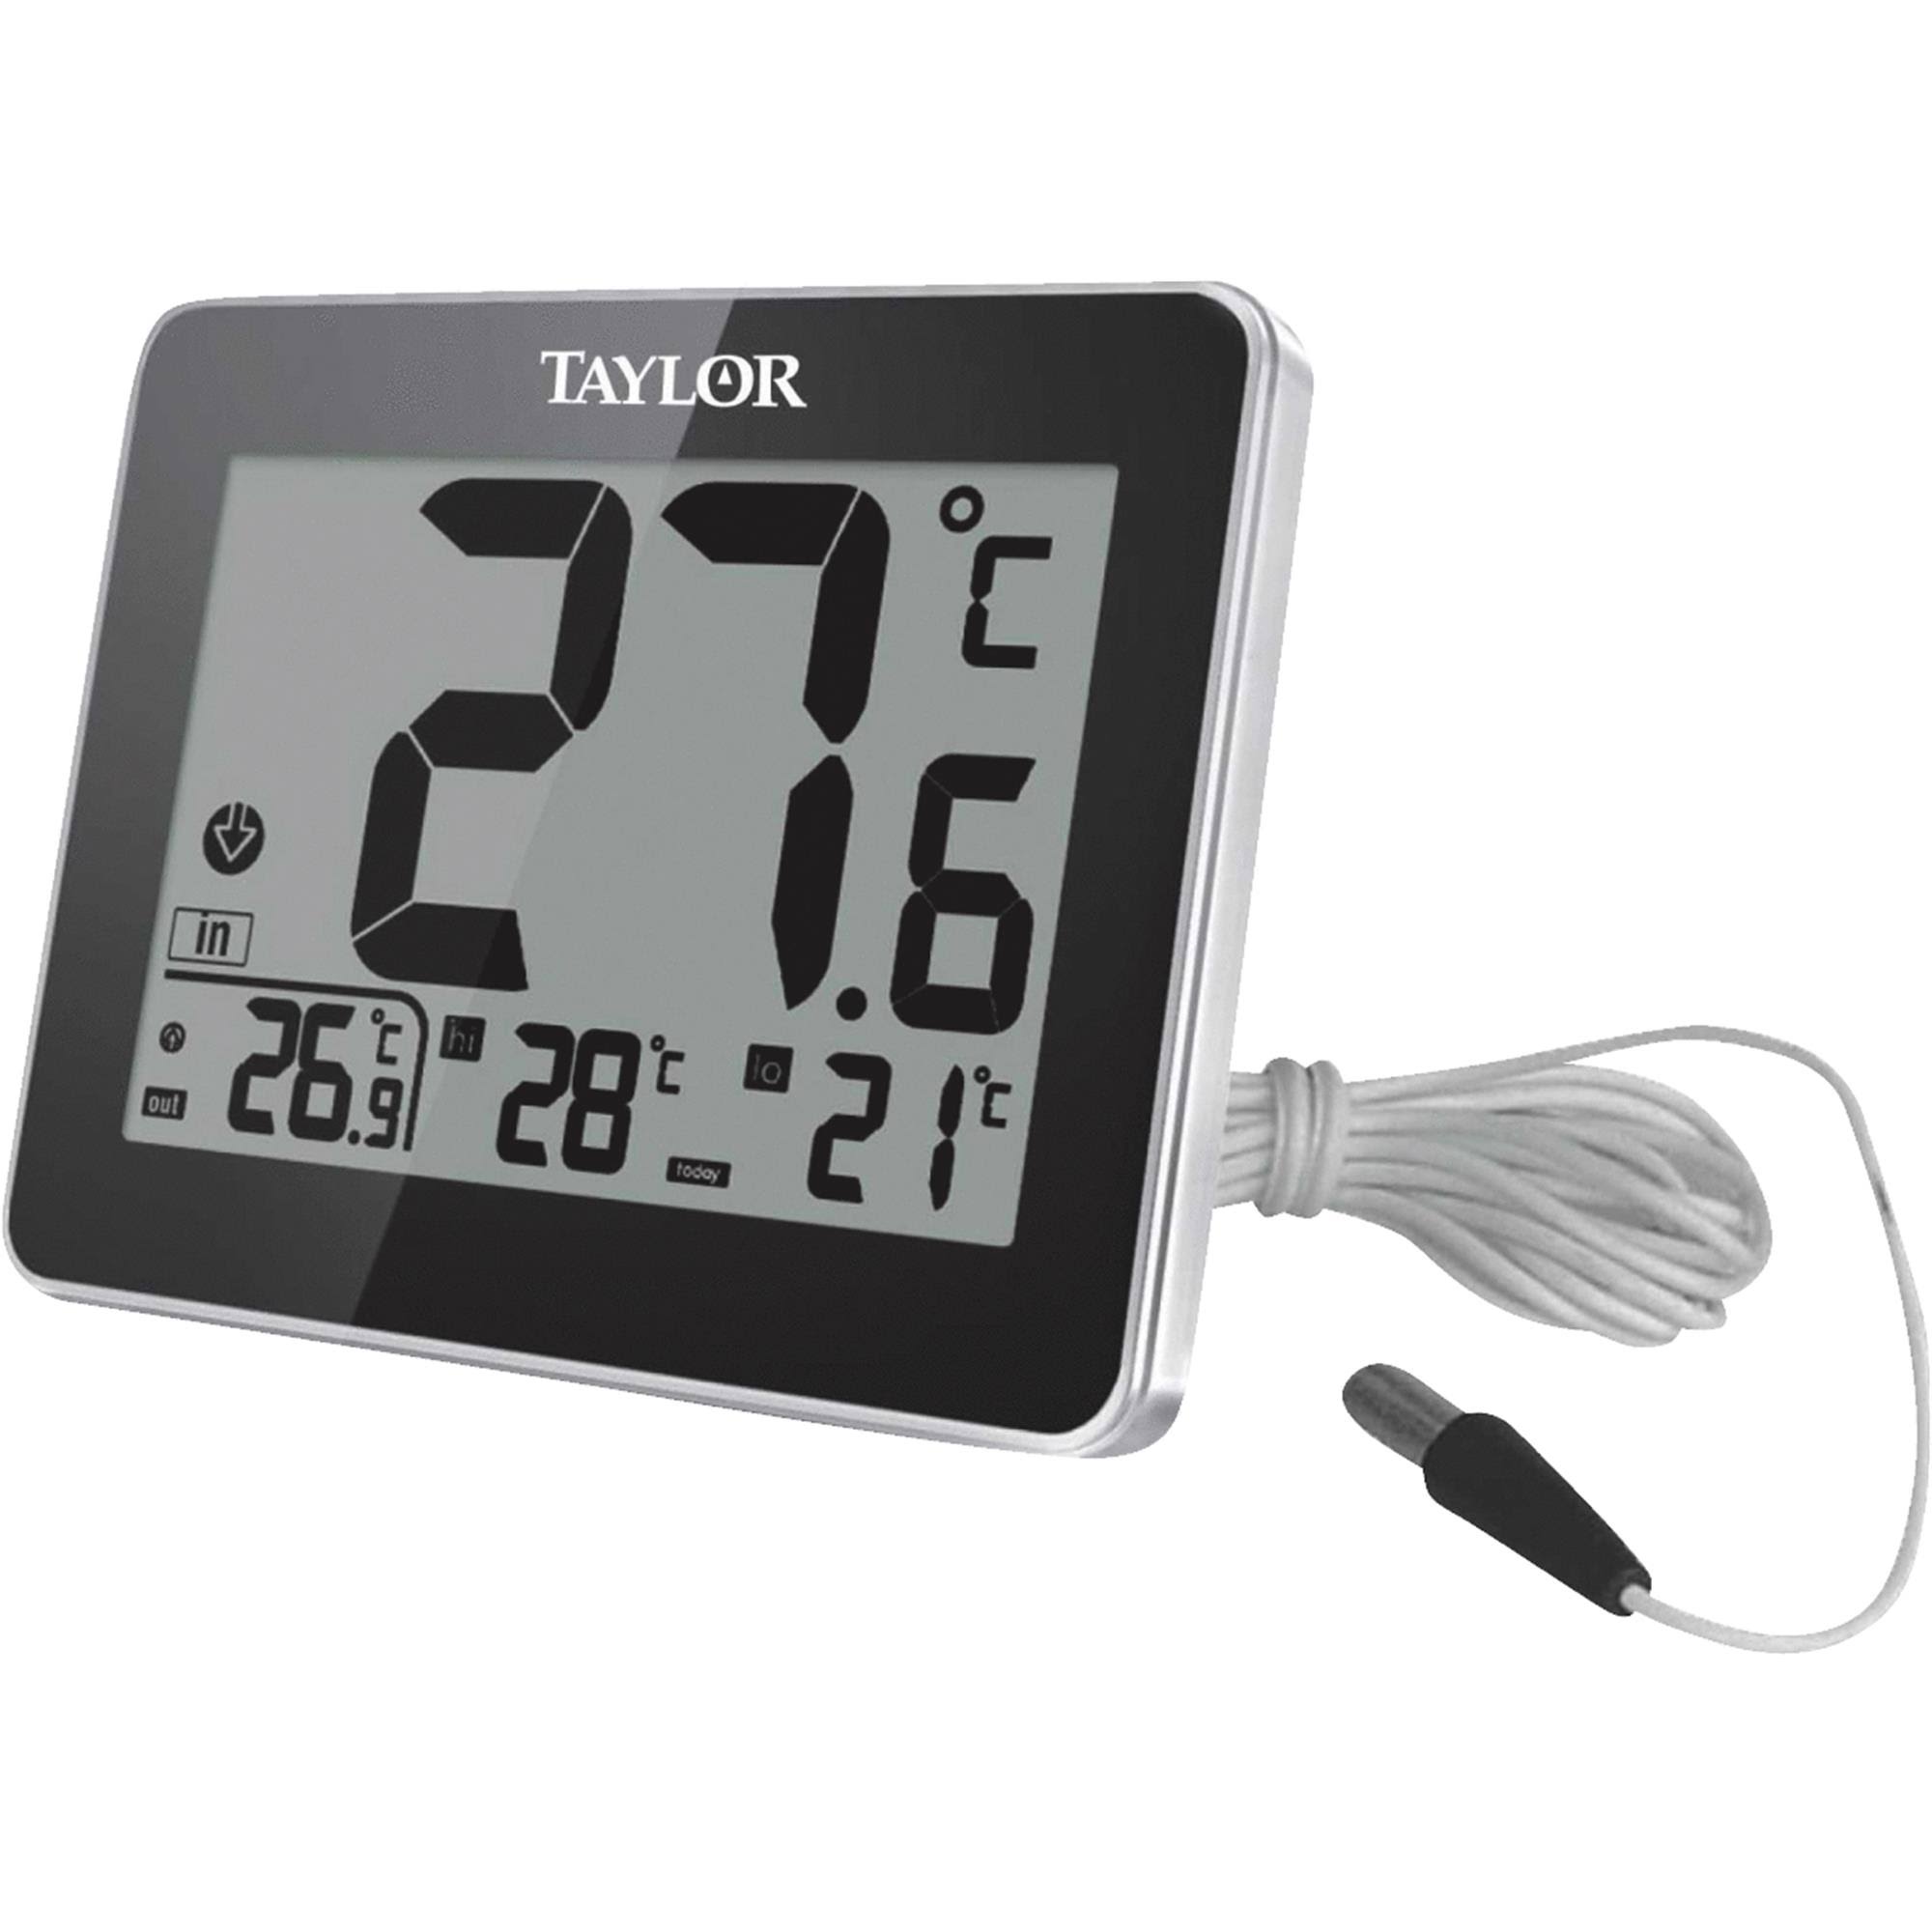 Taylor Wired Digital Thermometer - Black